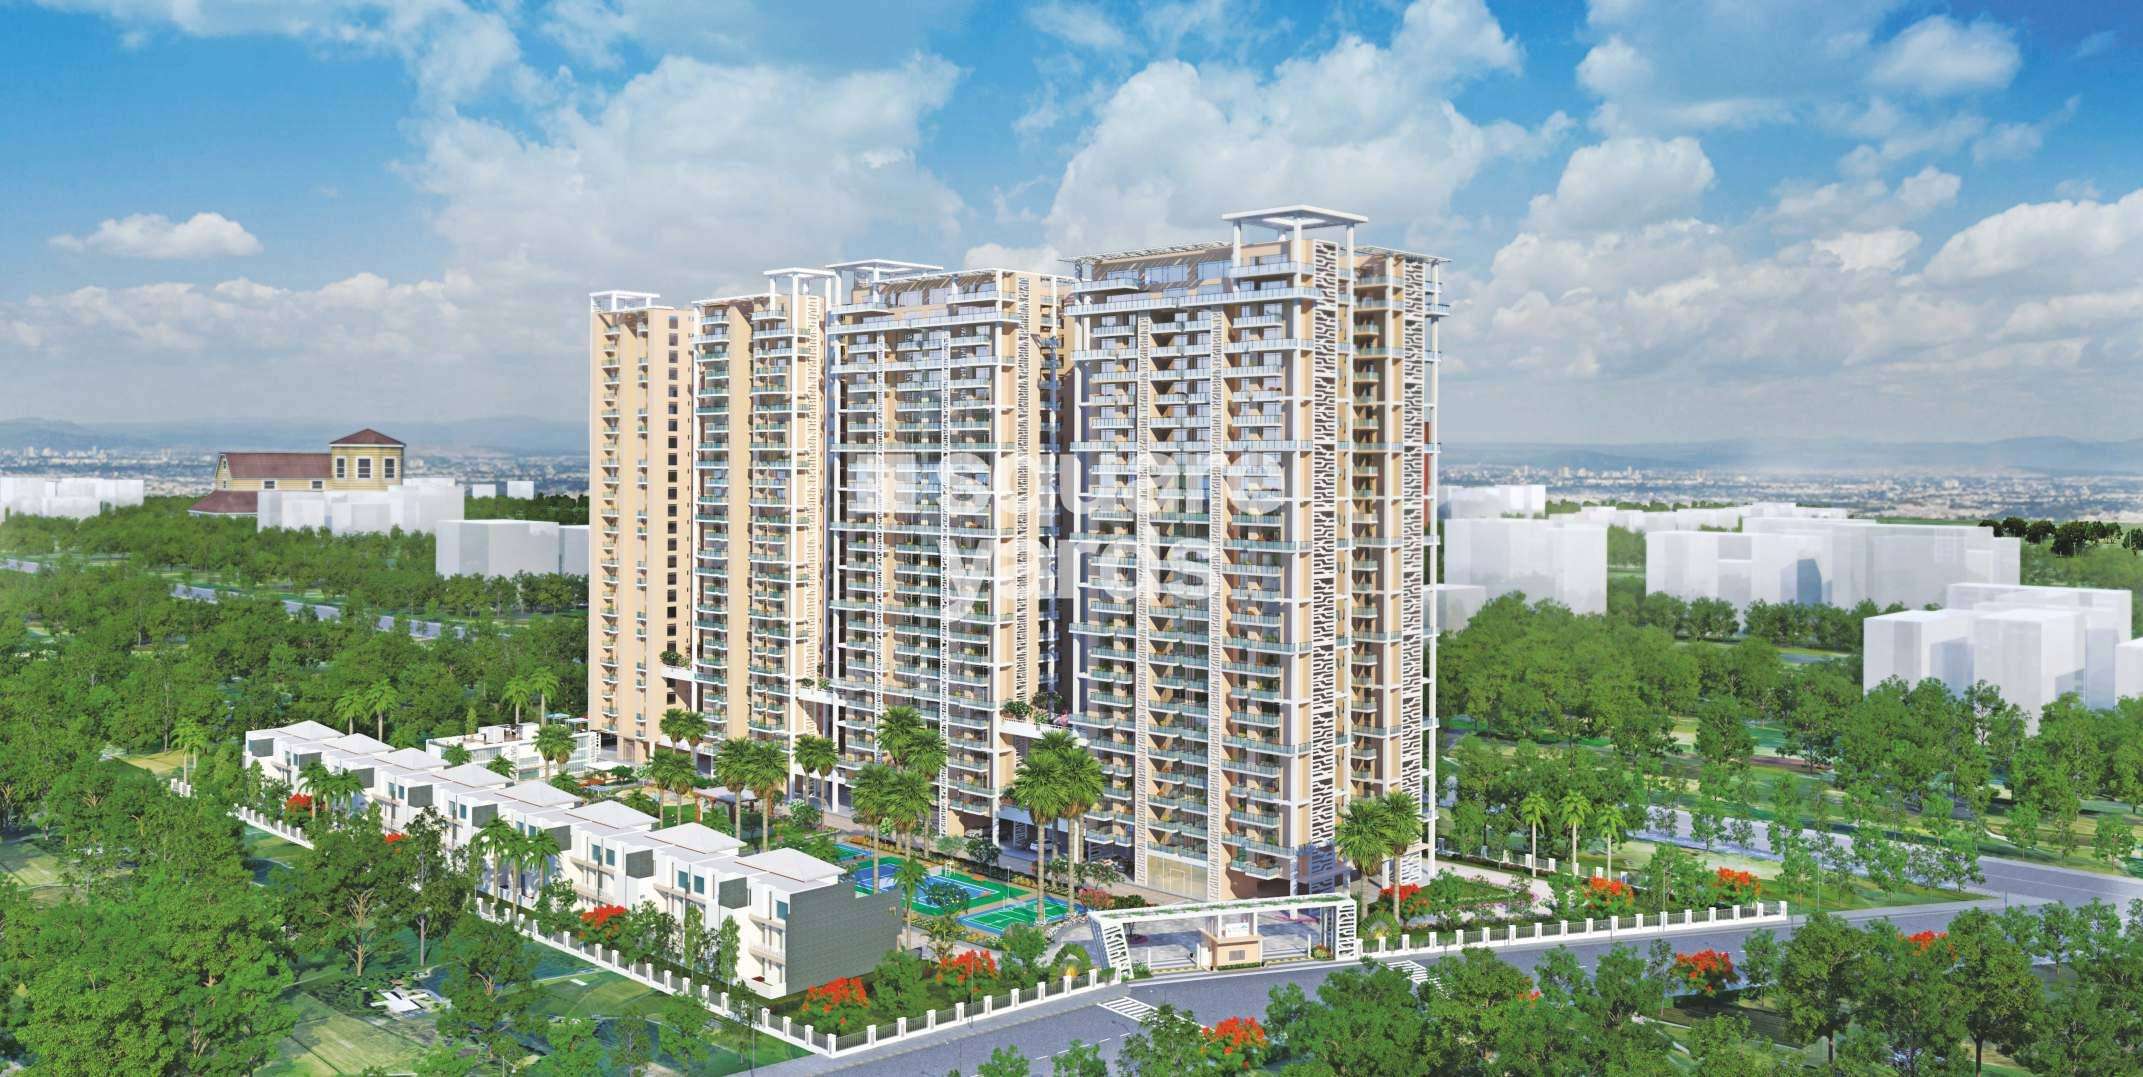 sikka kimaantra greens project tower view6 1625